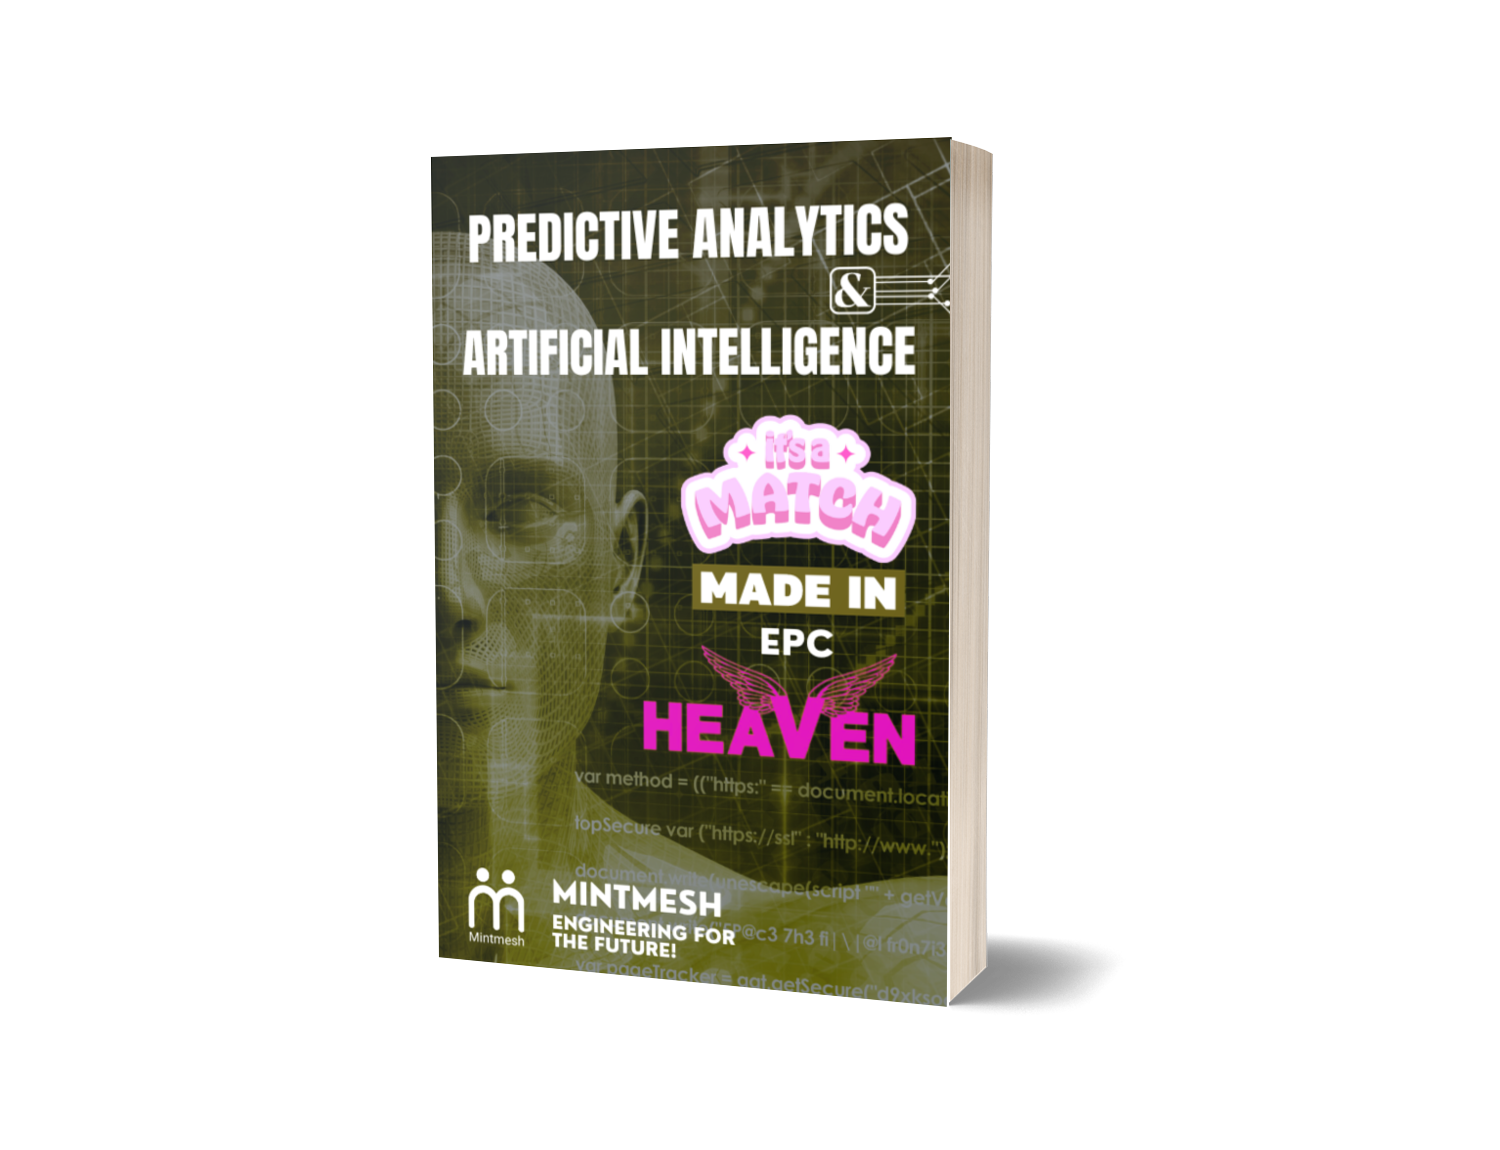 Predictive Analytics and AI, A Match Made in EPC Heaven